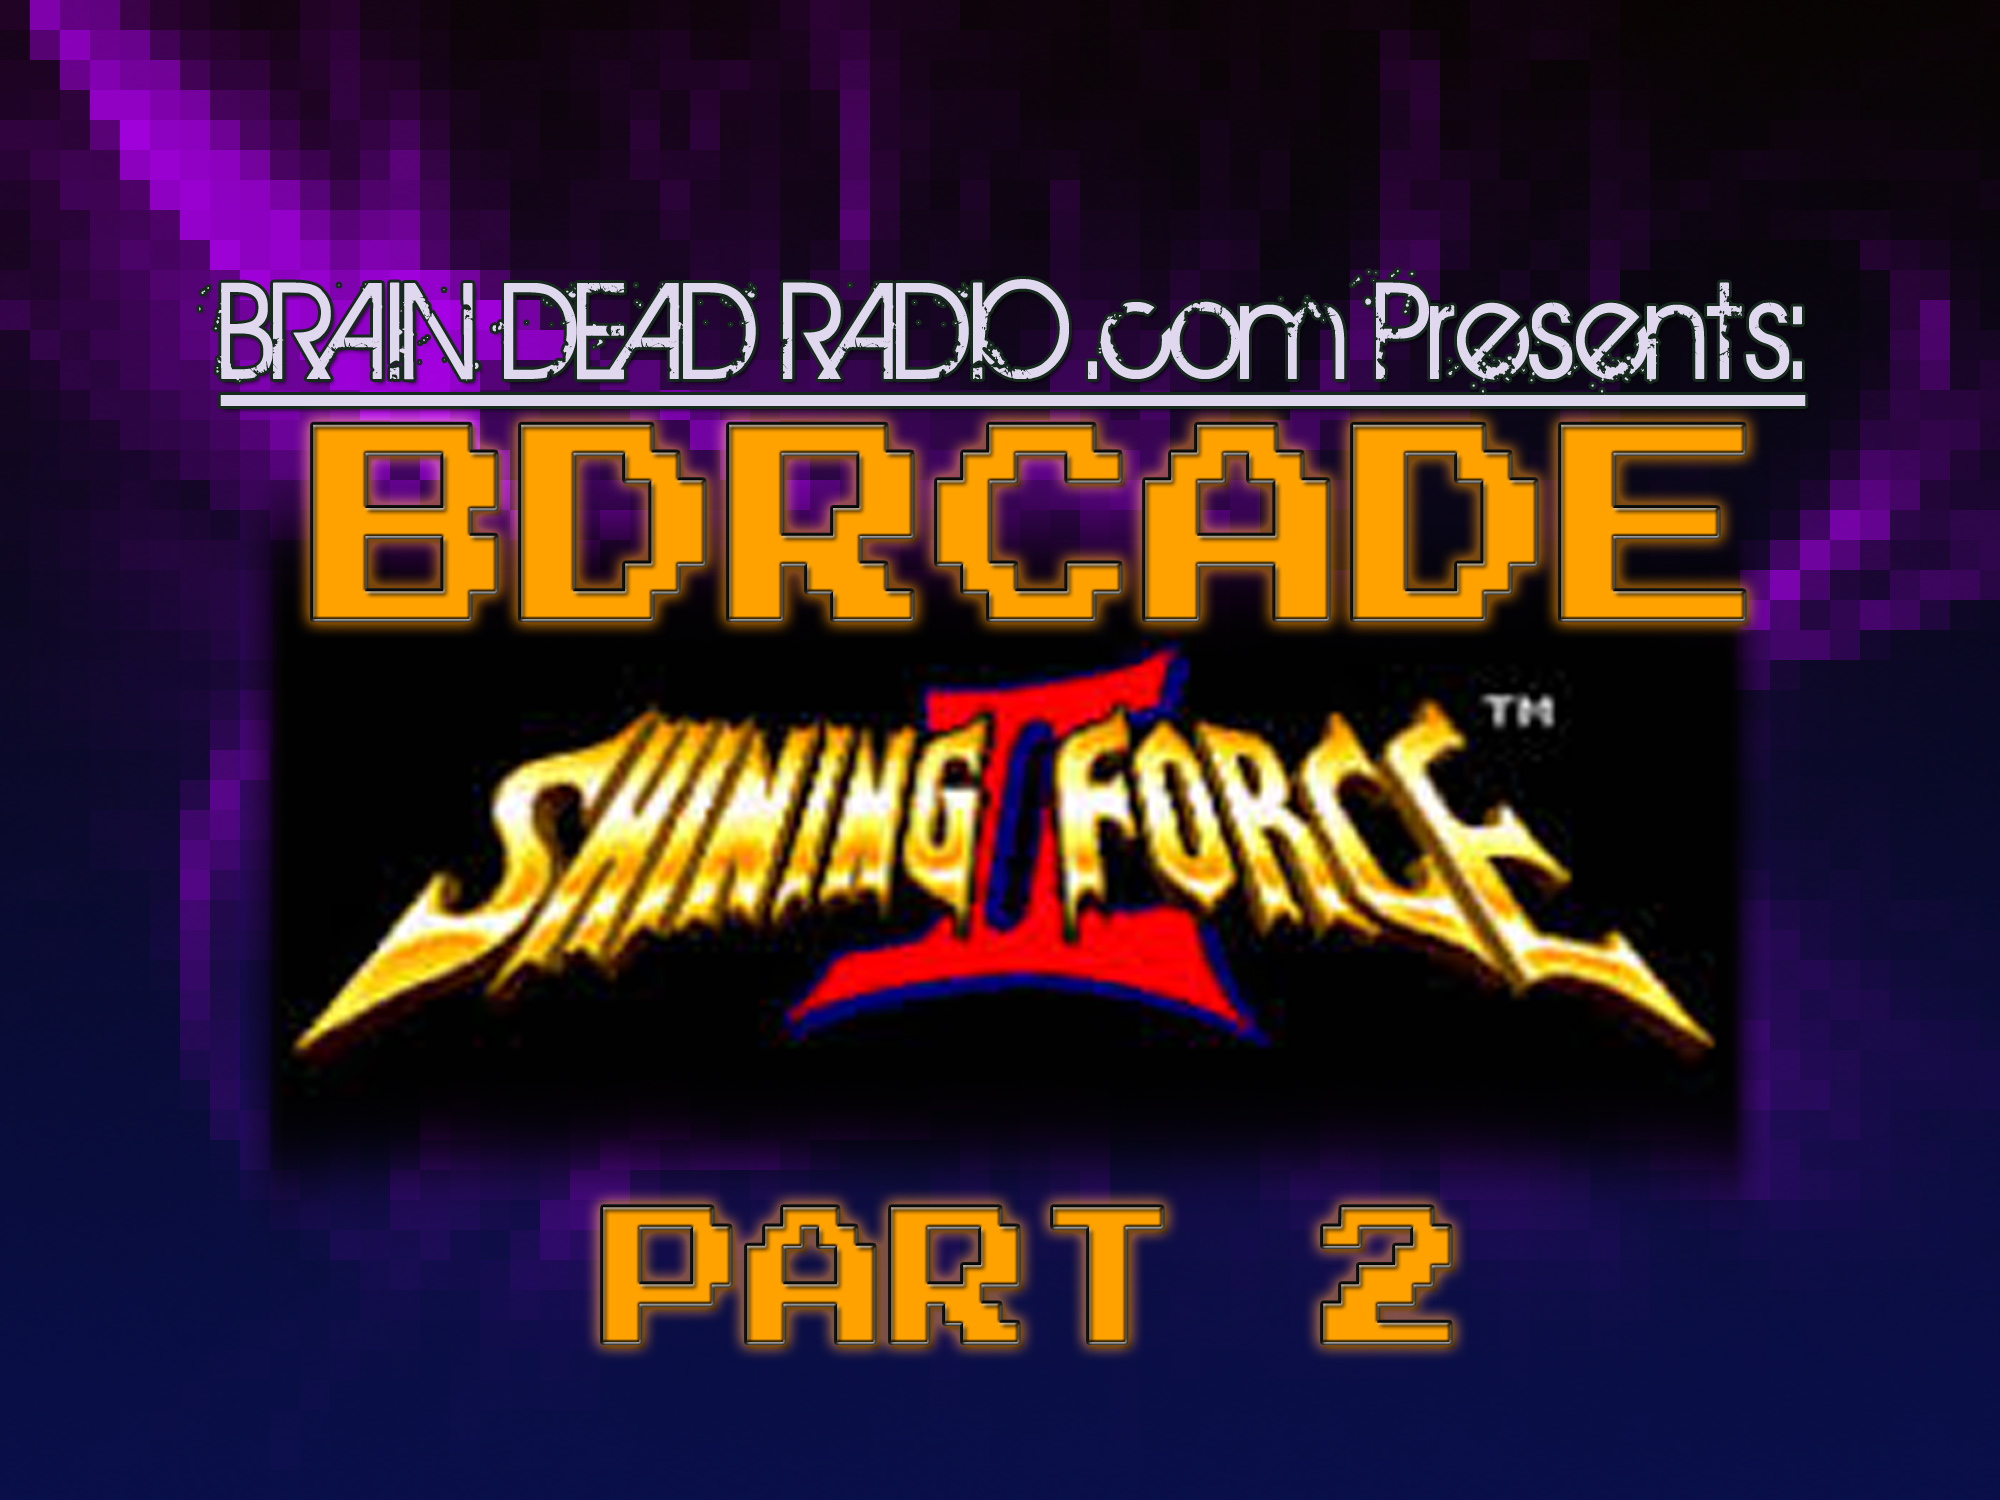 Shining Force 2 – Part 2 – BDRcade